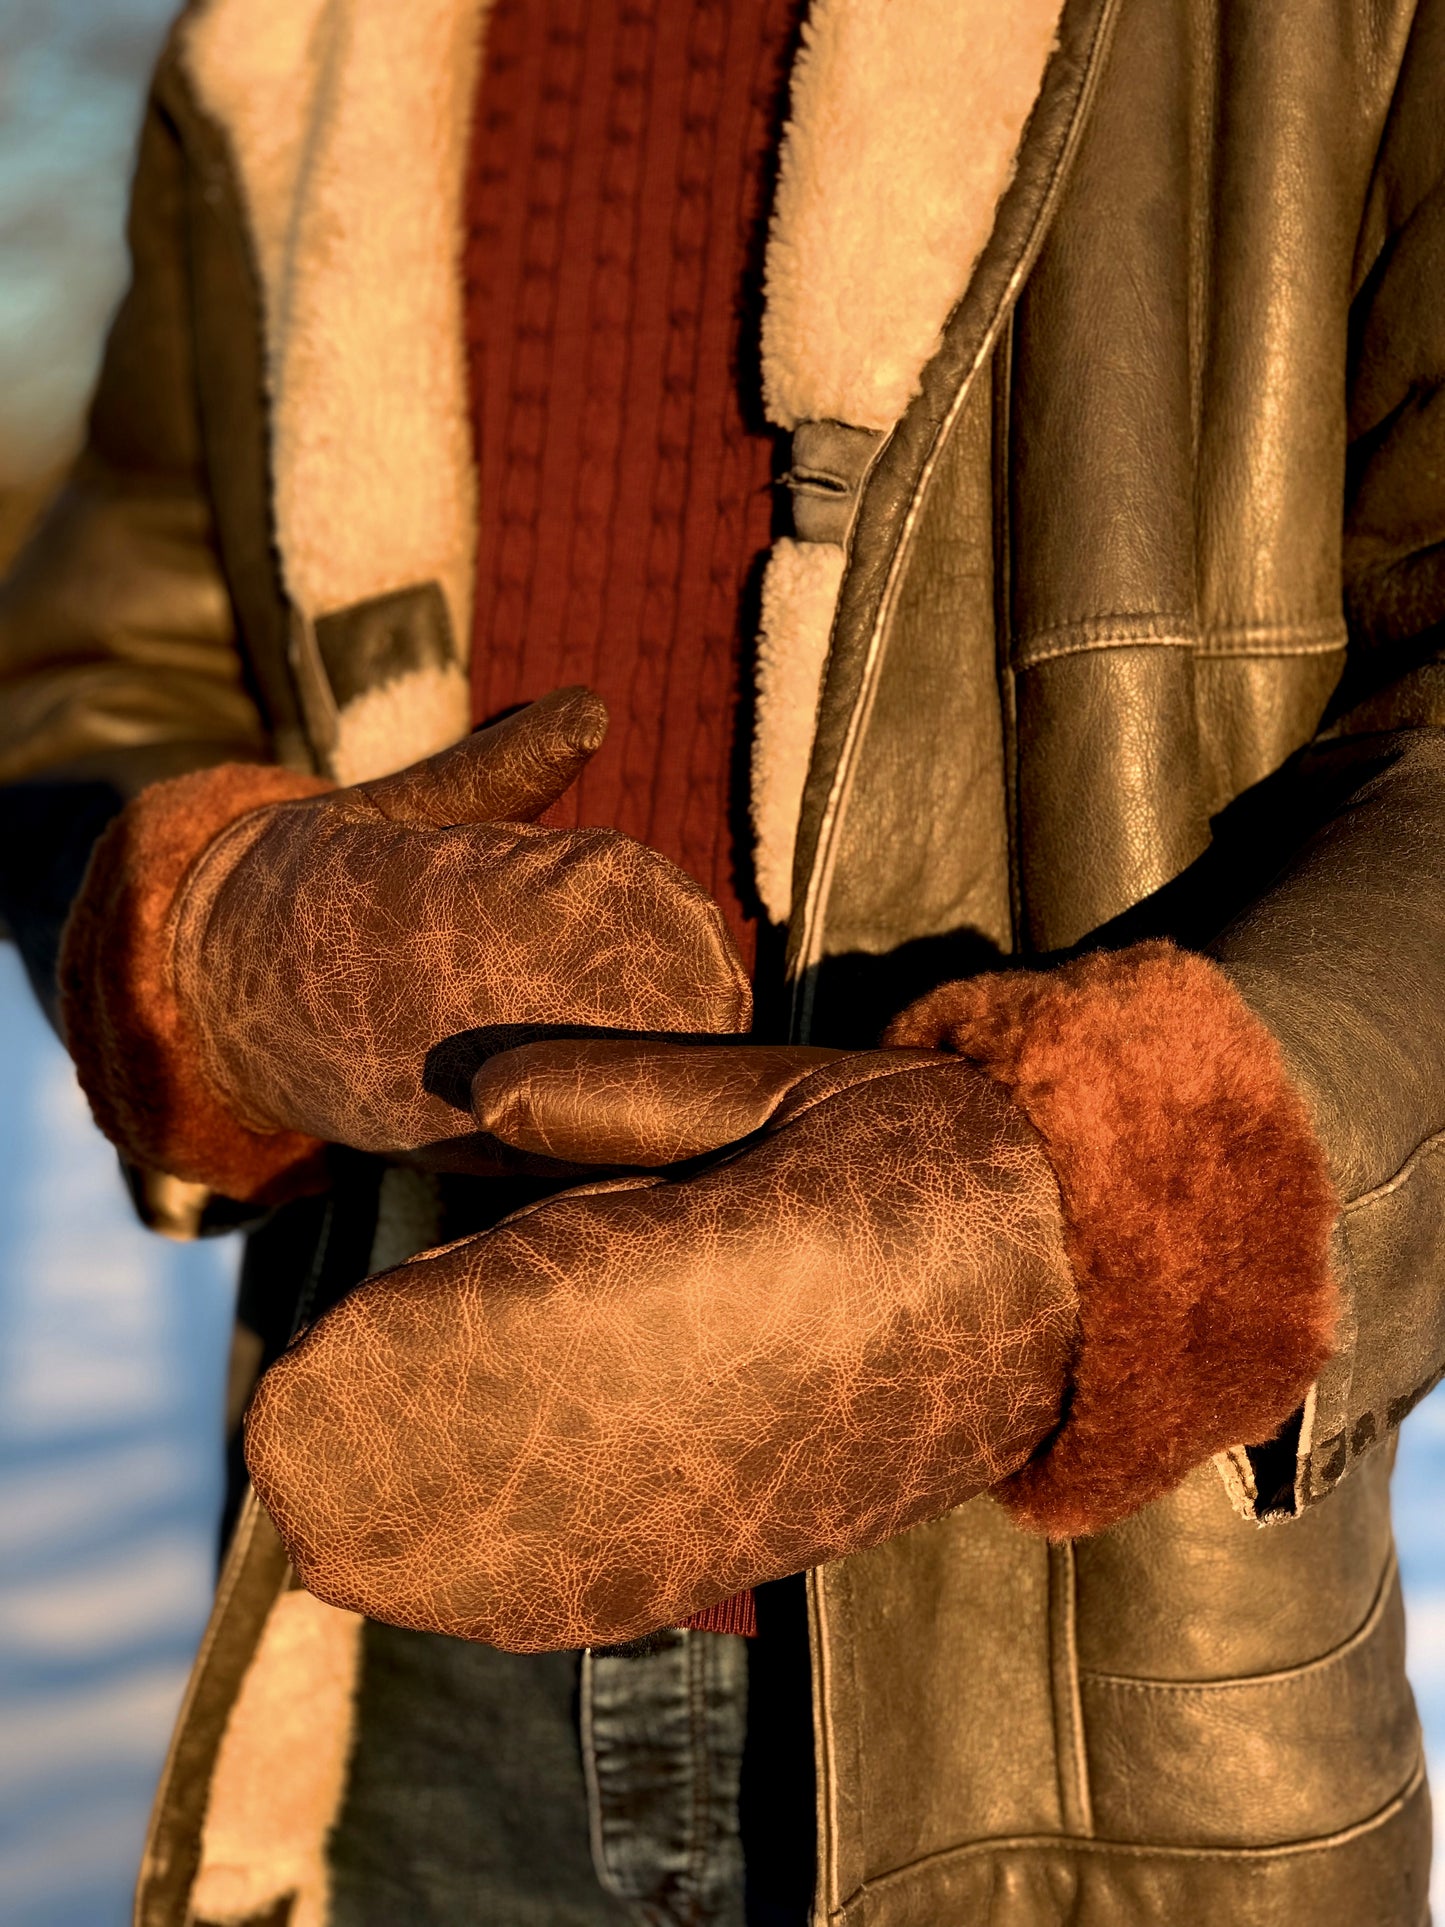 Padded leather gloves (mittens) , size L-XL (Color: MARBLE BROWN)